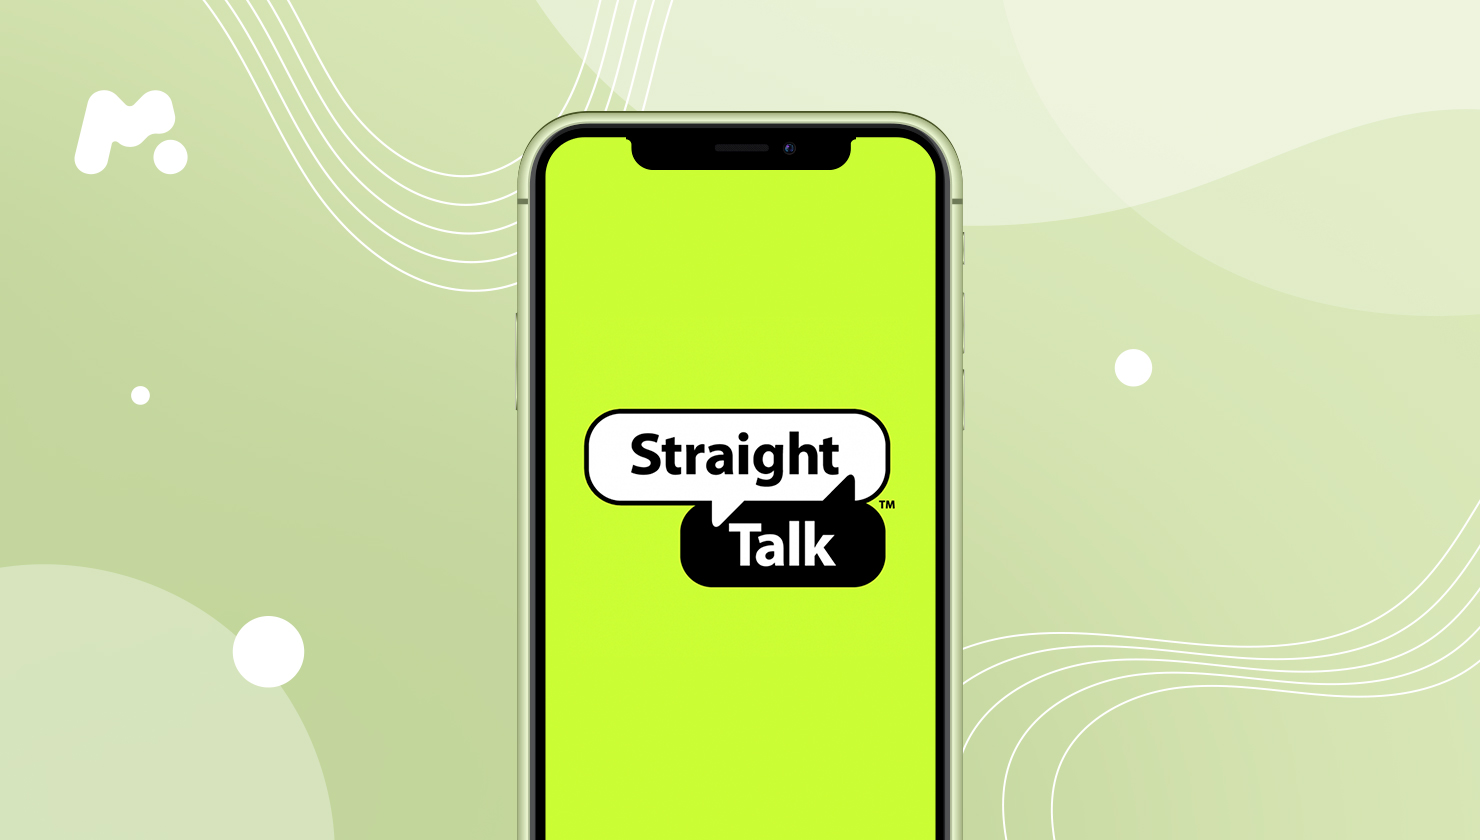 How to Track a Straight Talk Phone on Another Device Remotely